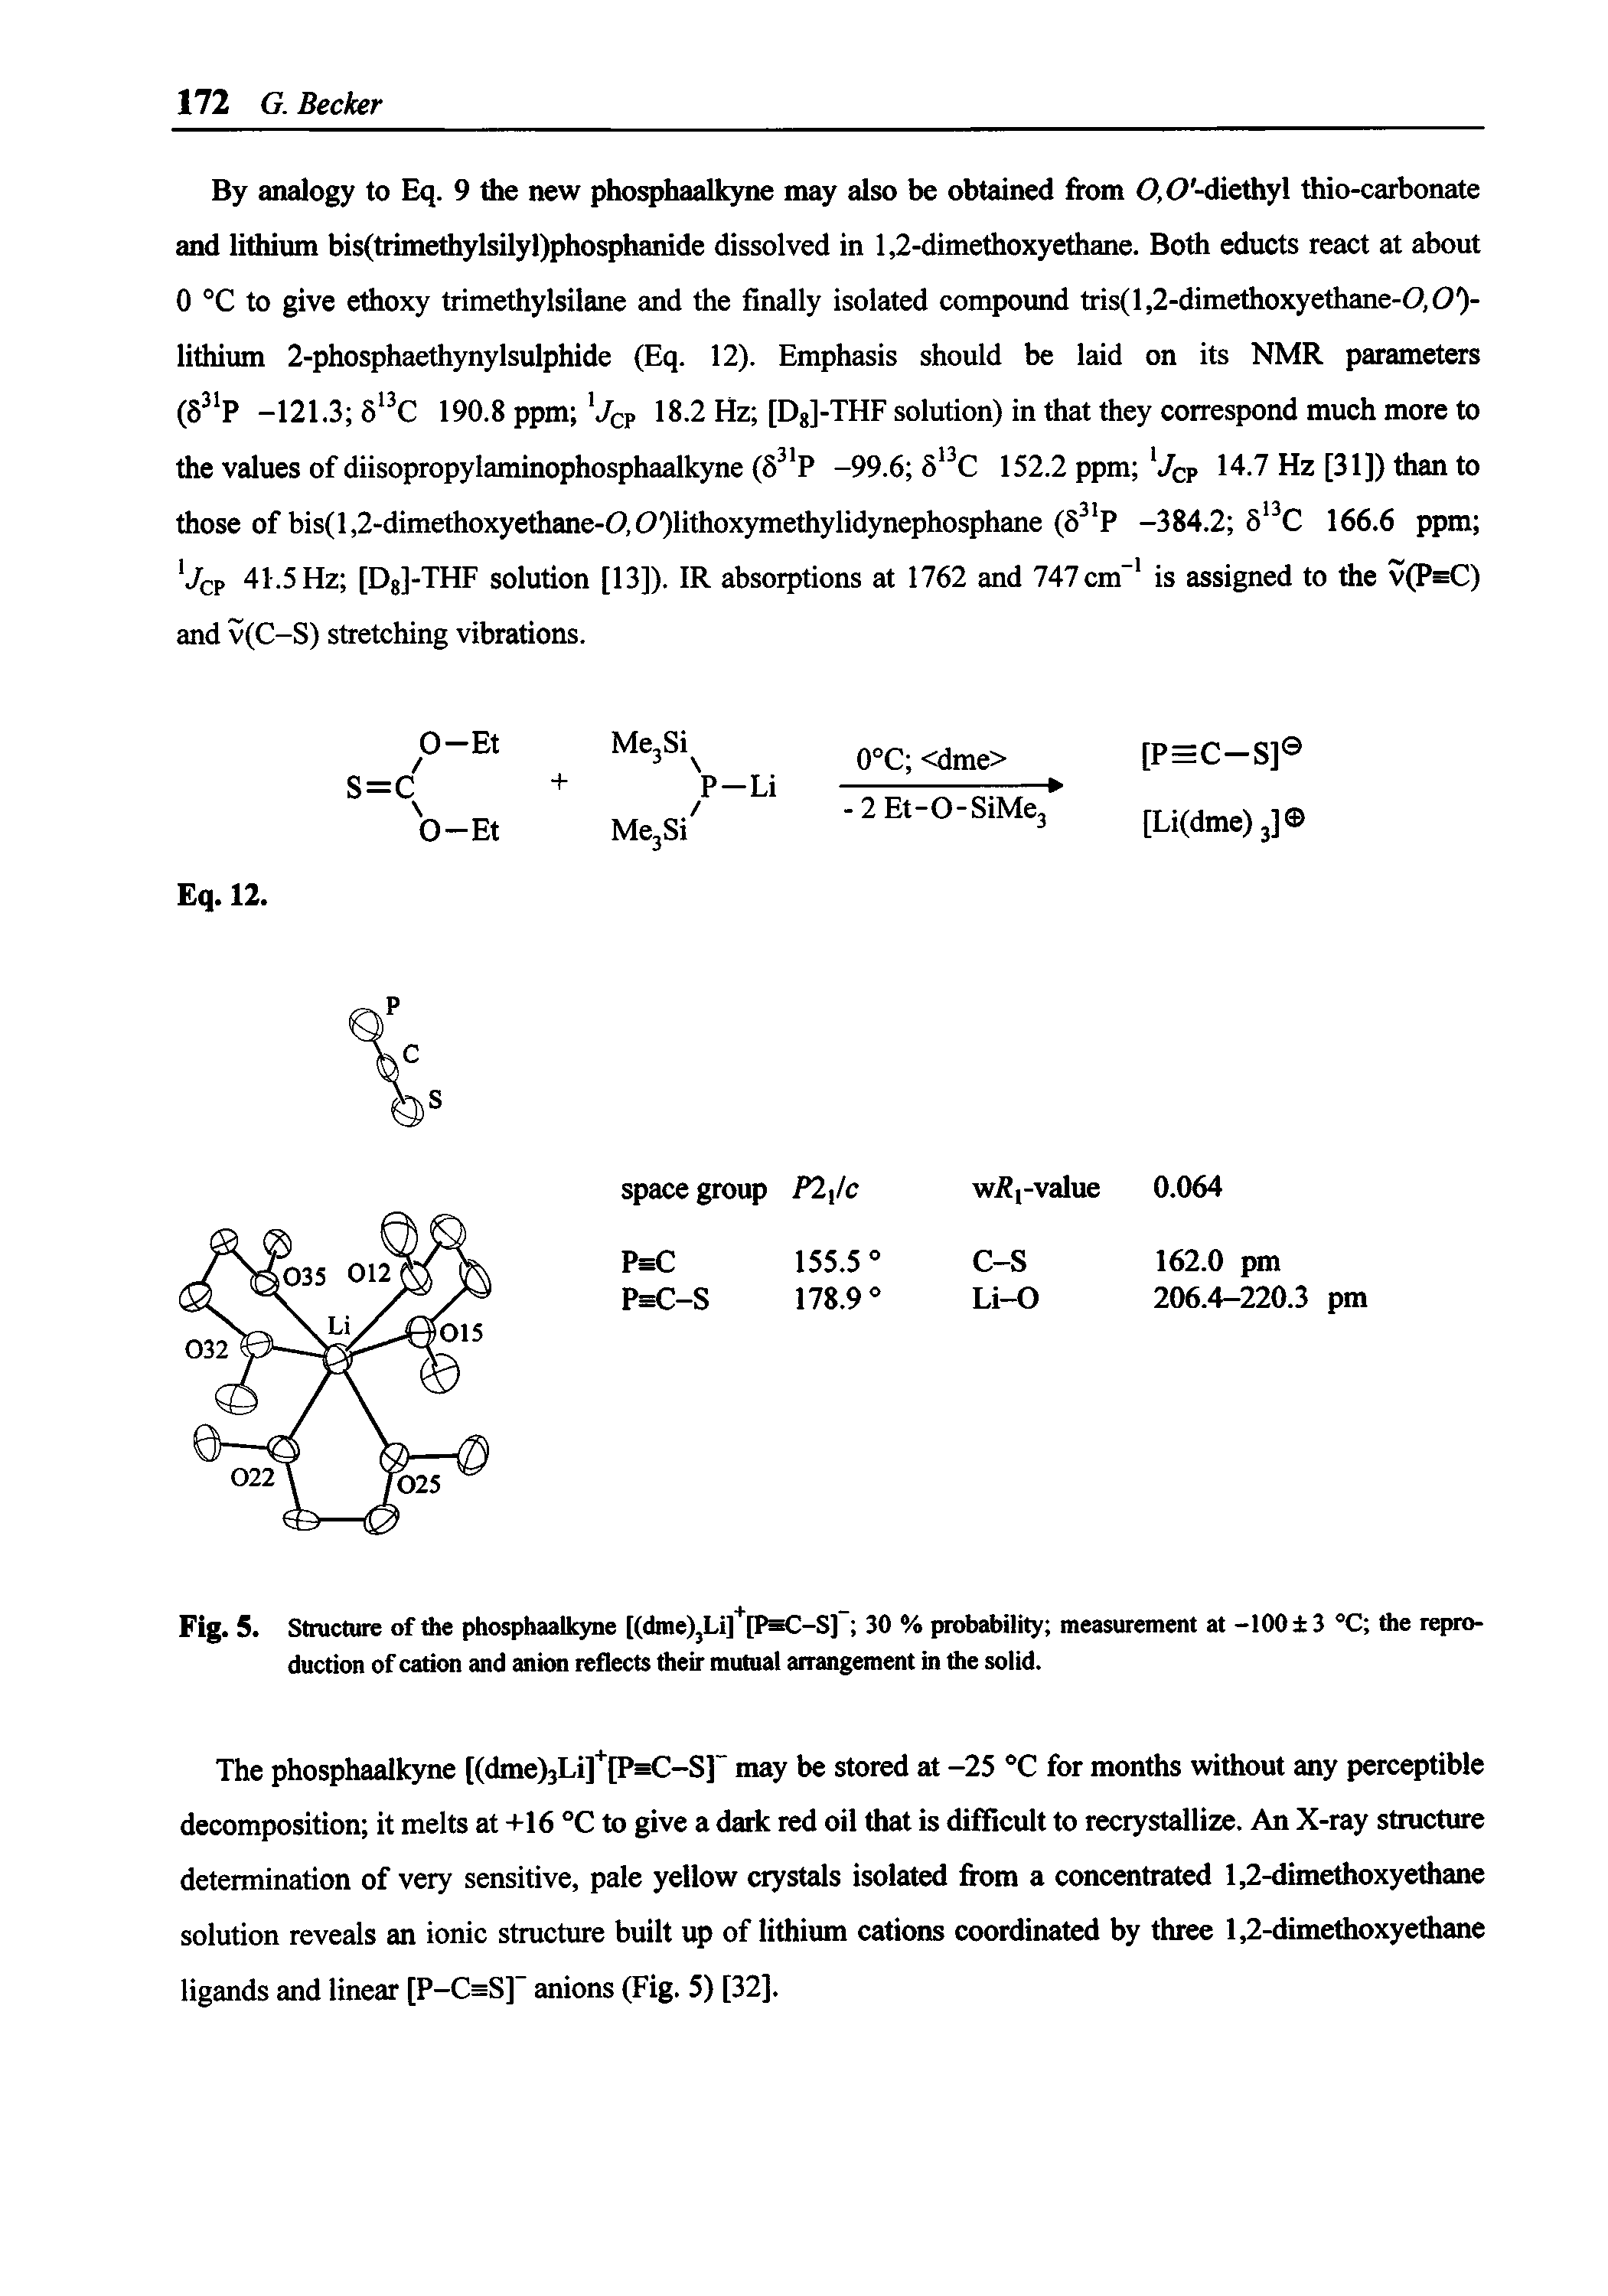 Fig. 5. Structure of the phosphaalkyne [(dme)jLi] [IMi -S] 30 % probability measurement at -100 3 °C the reproduction of cation and anion reflects their mutual arrangement in the solid.